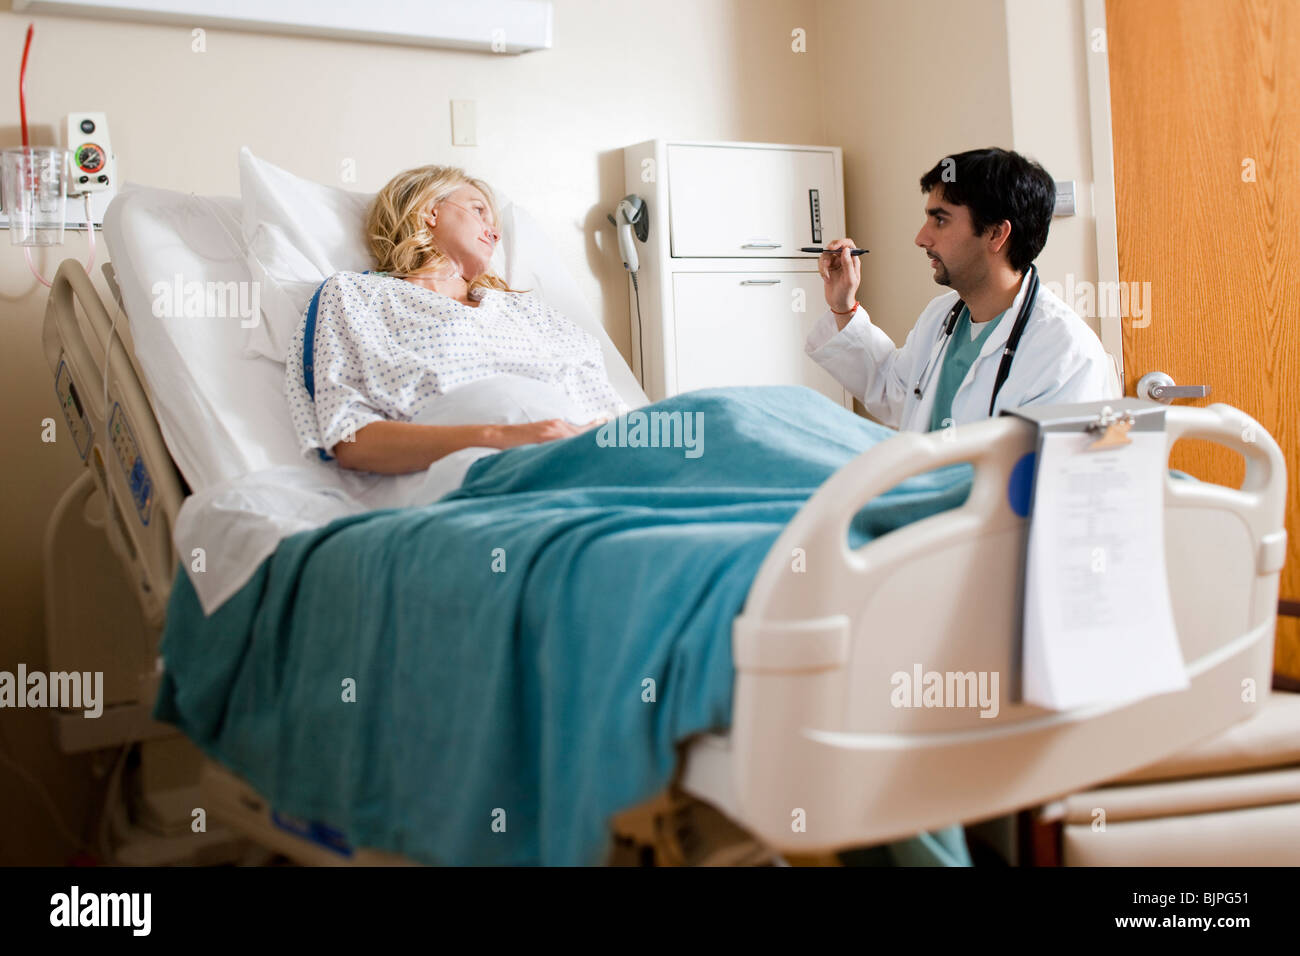 Woman in hospital bed Stock Photo